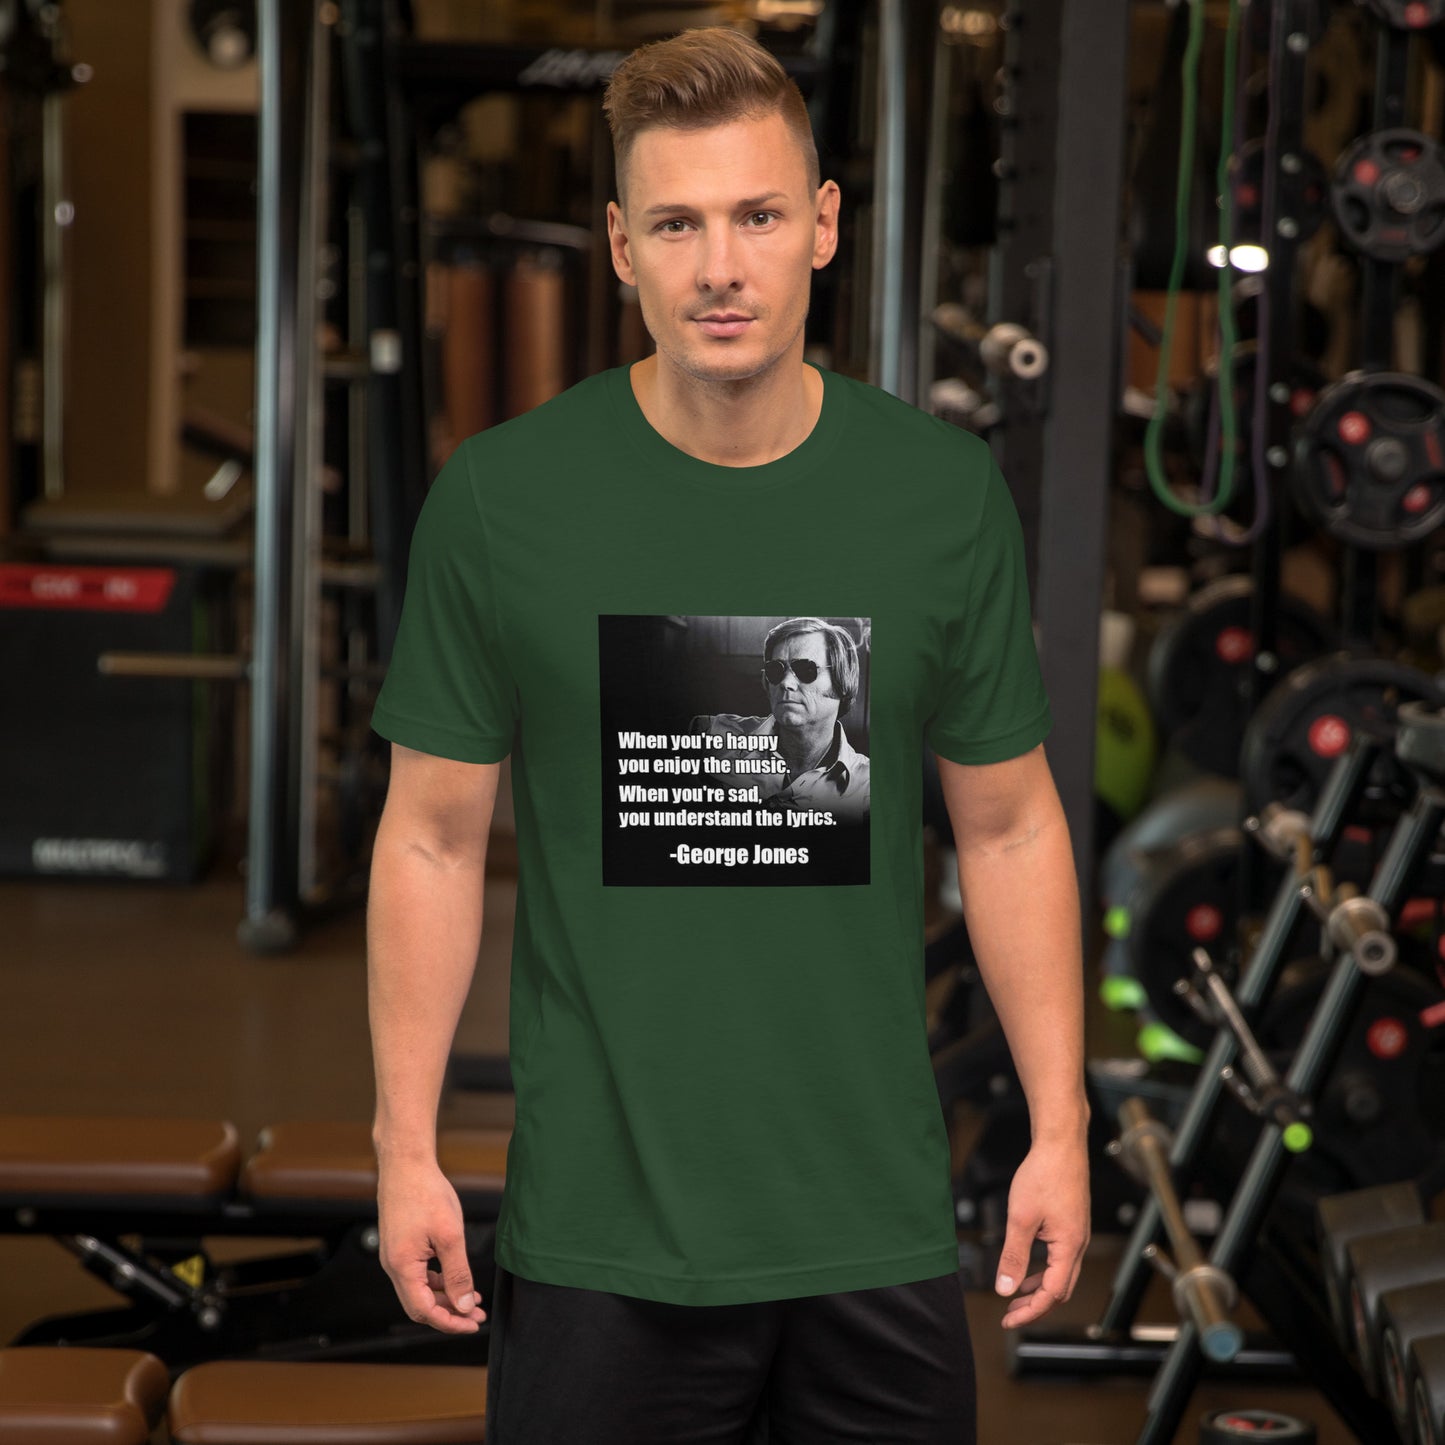 George & Music - Get Your Twang On with Classic Country Tees - The Ultimate Unisex T-Shirt for True Country Souls! - Classic Country Tees